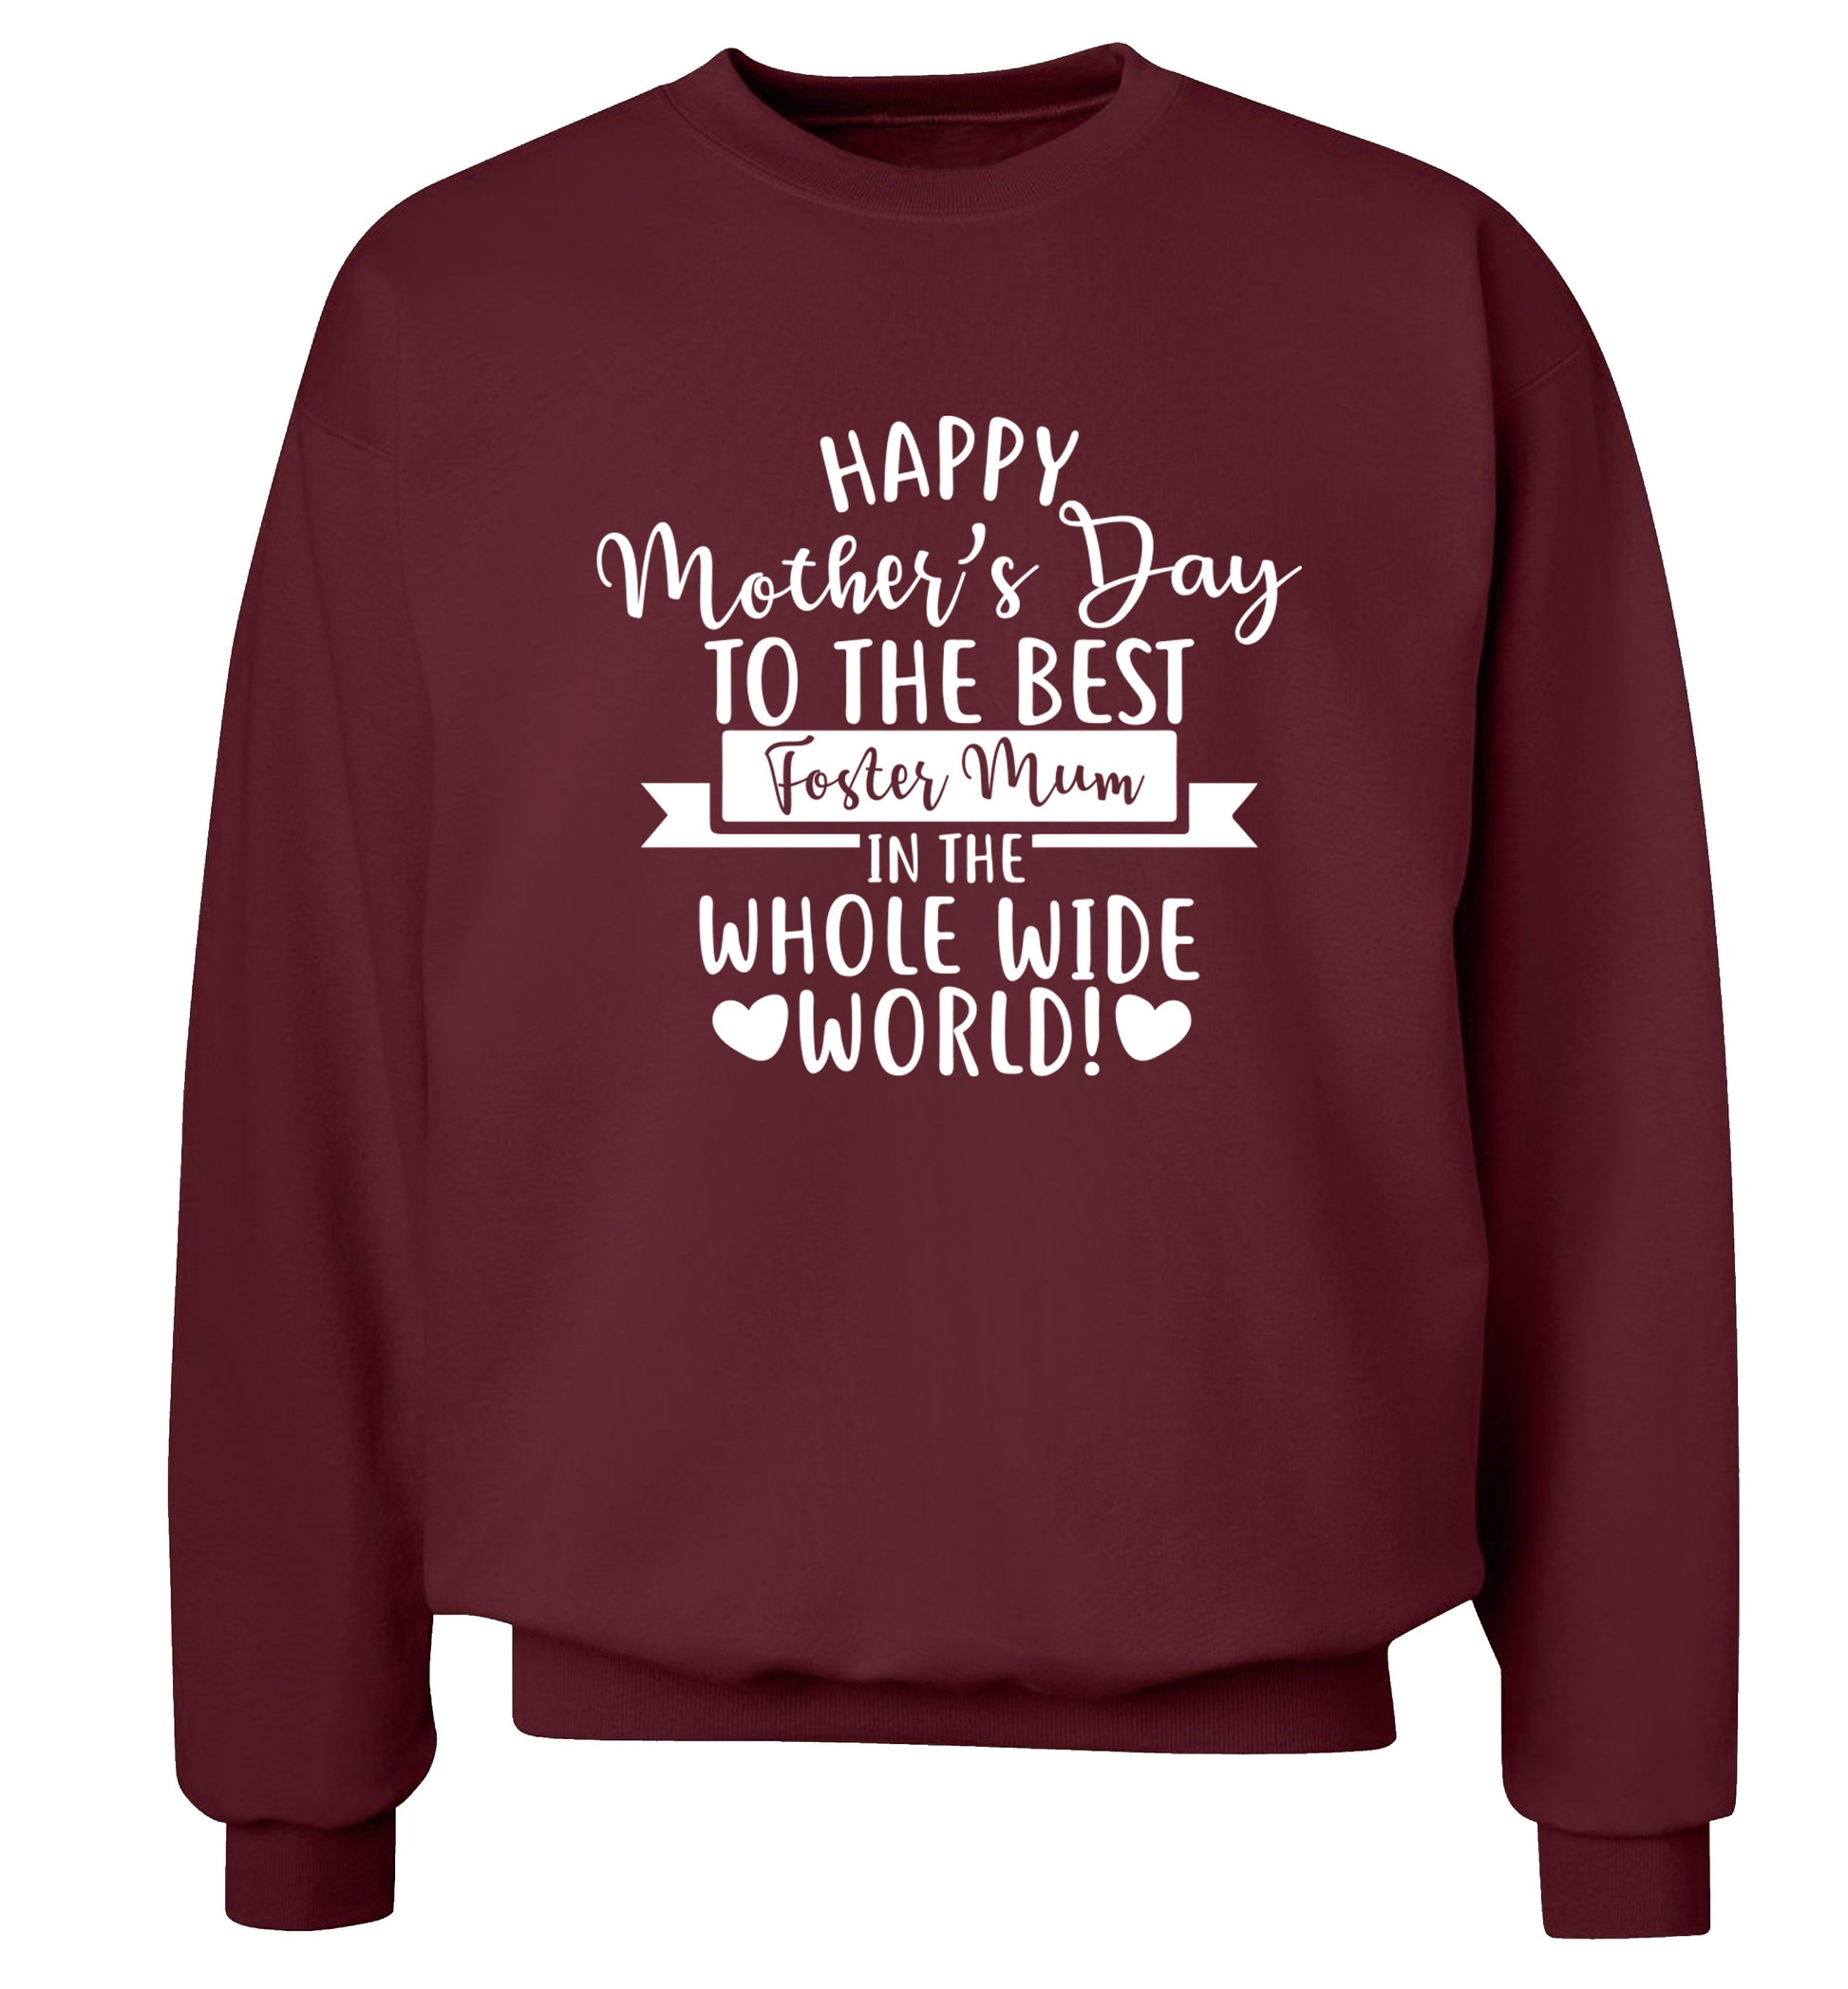 Happy mother's day to the best foster mum in the world Adult's unisex maroon Sweater 2XL